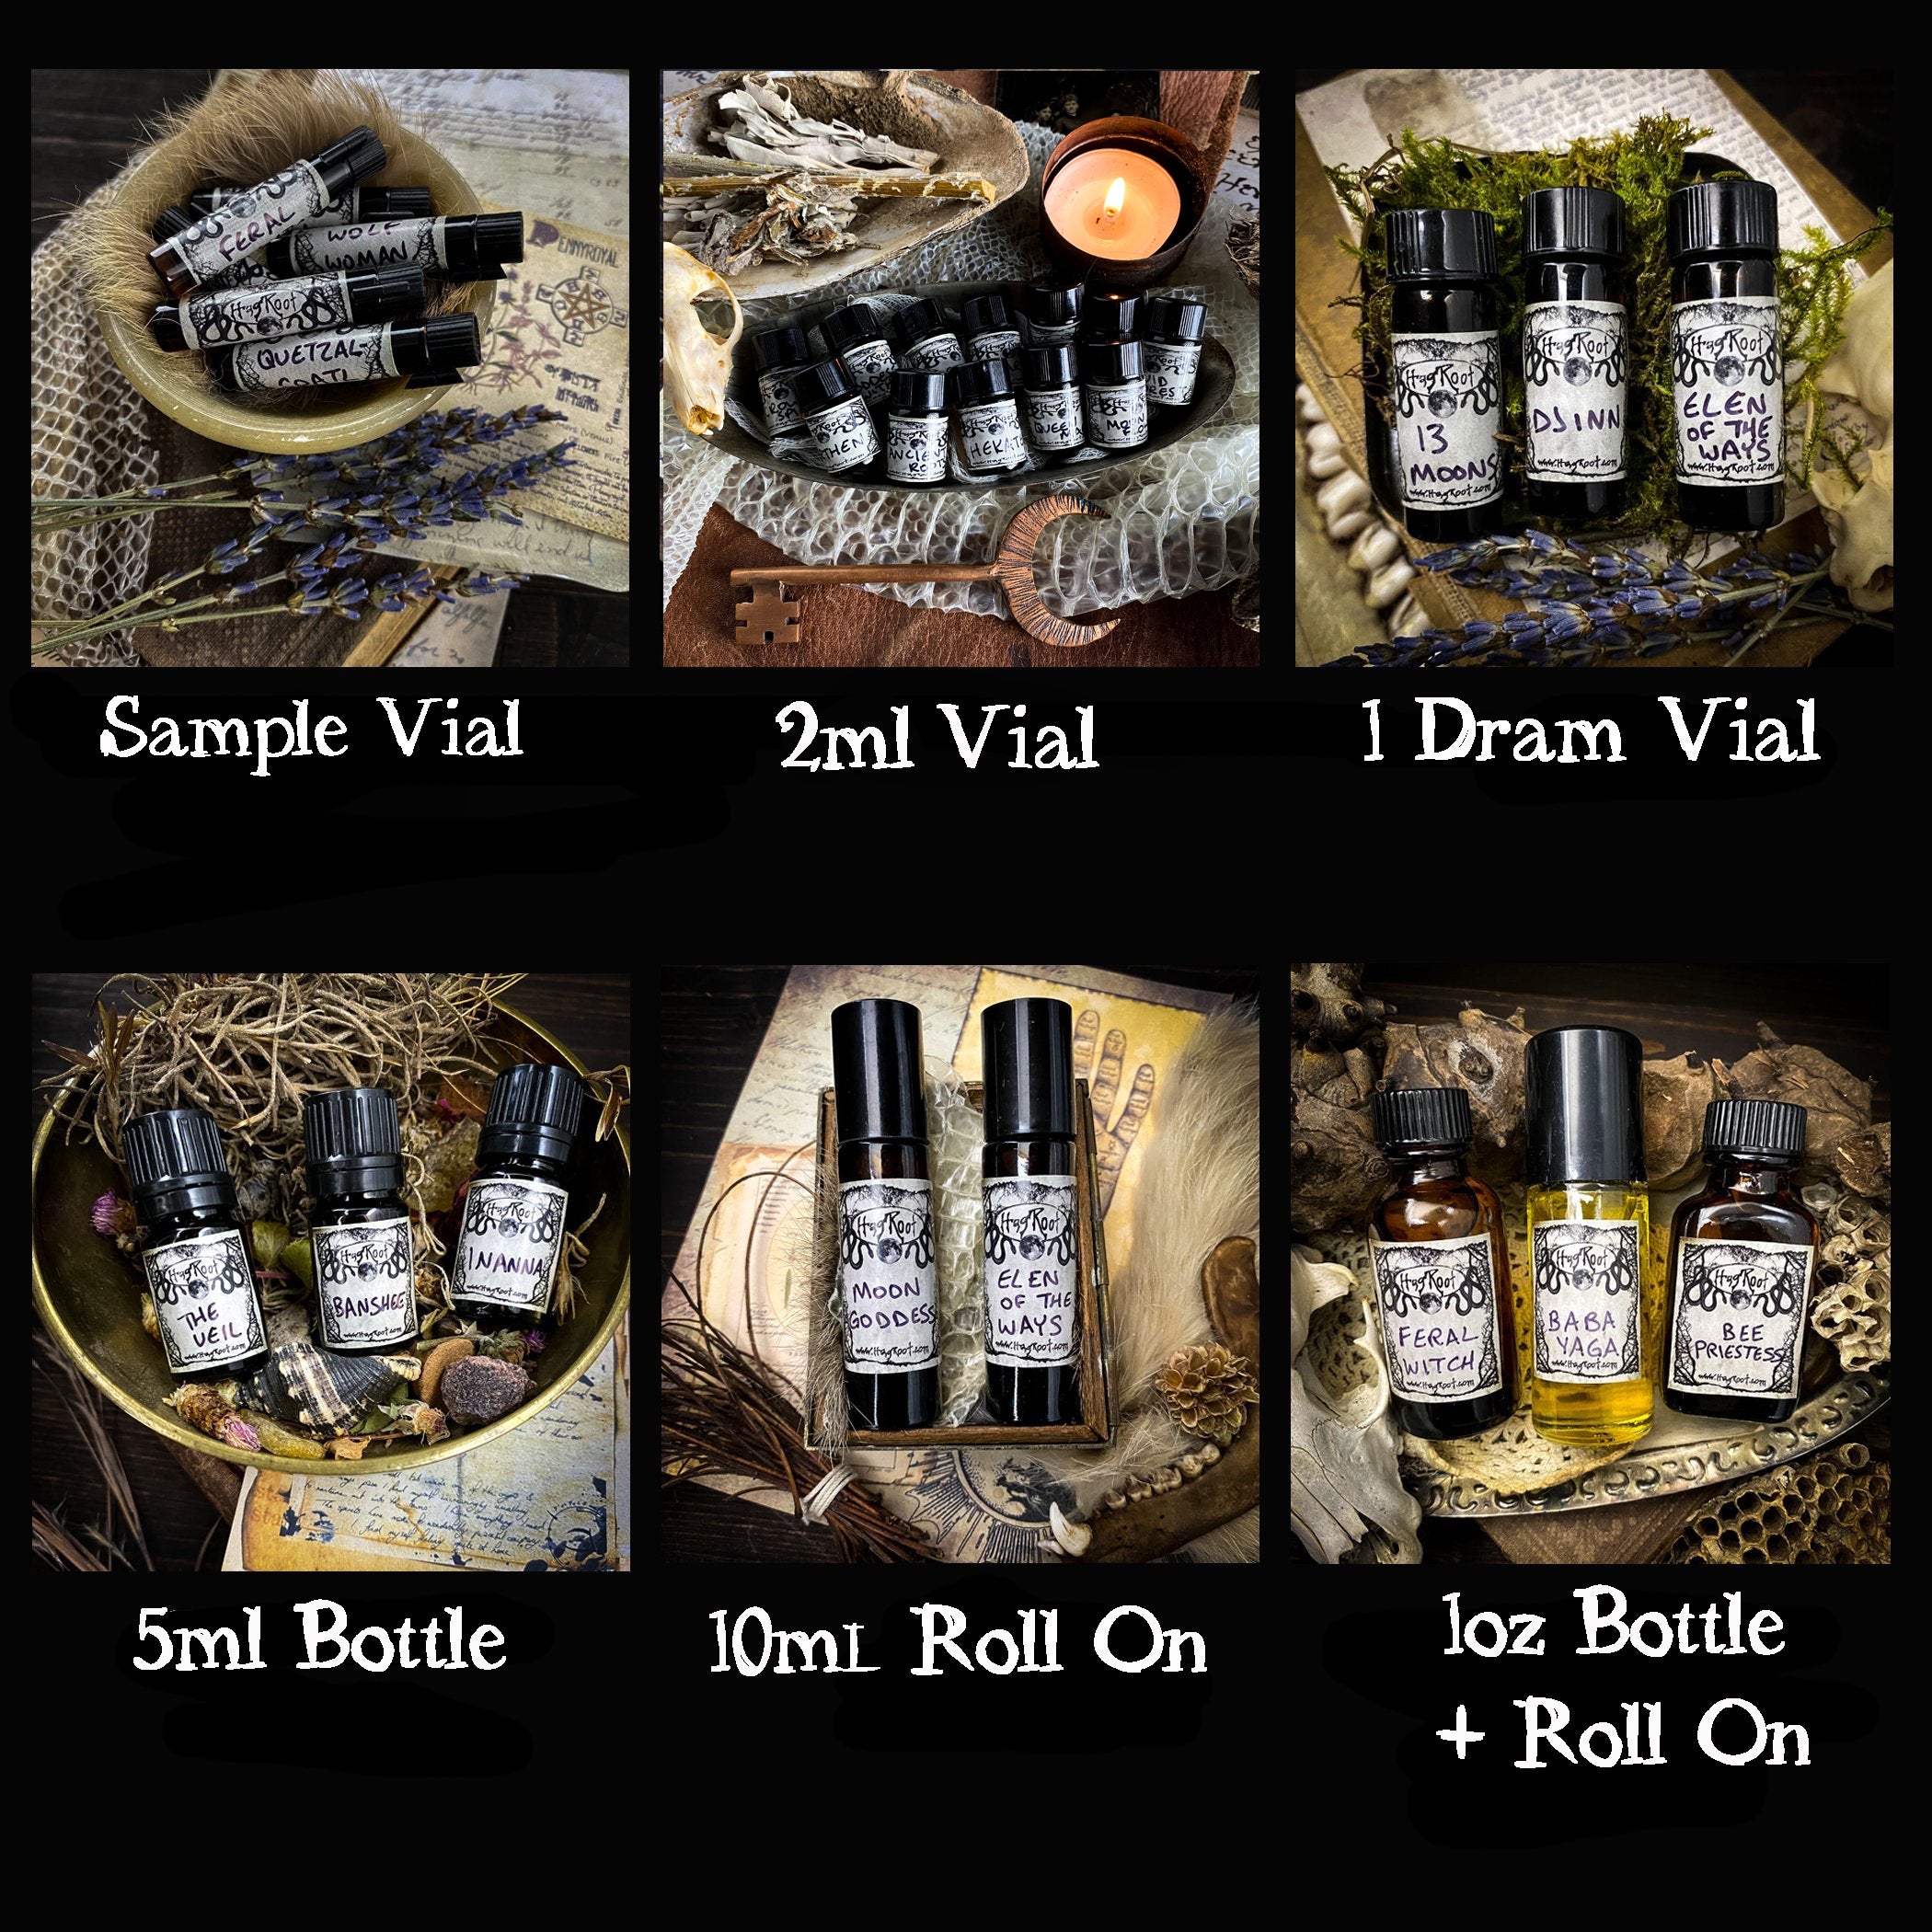 THE CAILLEACH-(Carnation, Vanilla, White Pepper, Galbanum, Amber, Frankincense, Anise)-Perfume, Cologne, Anointing, Ritual Oil